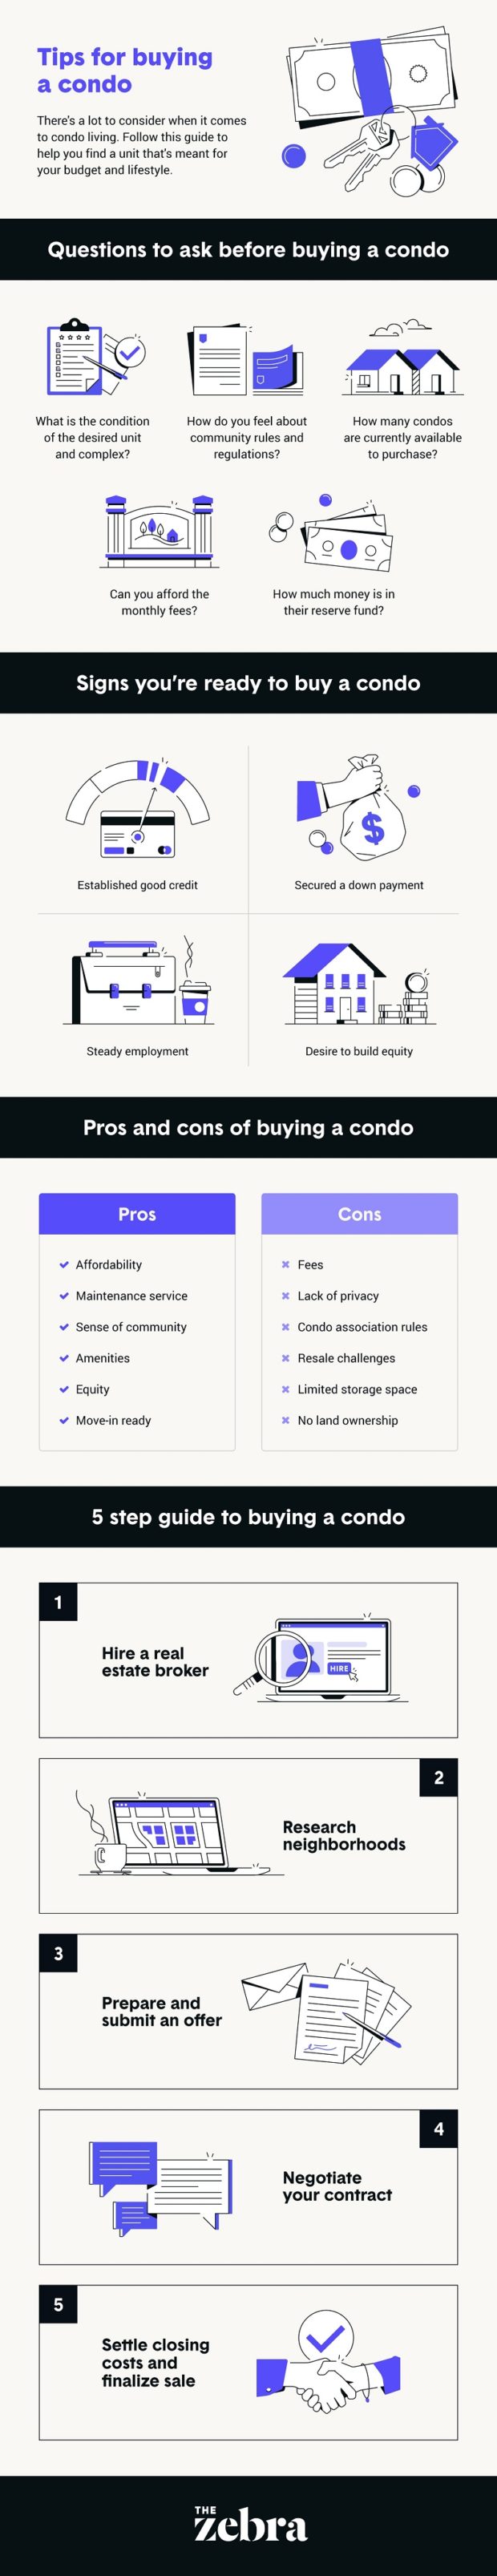 The Pros and Cons of Buying a Condo